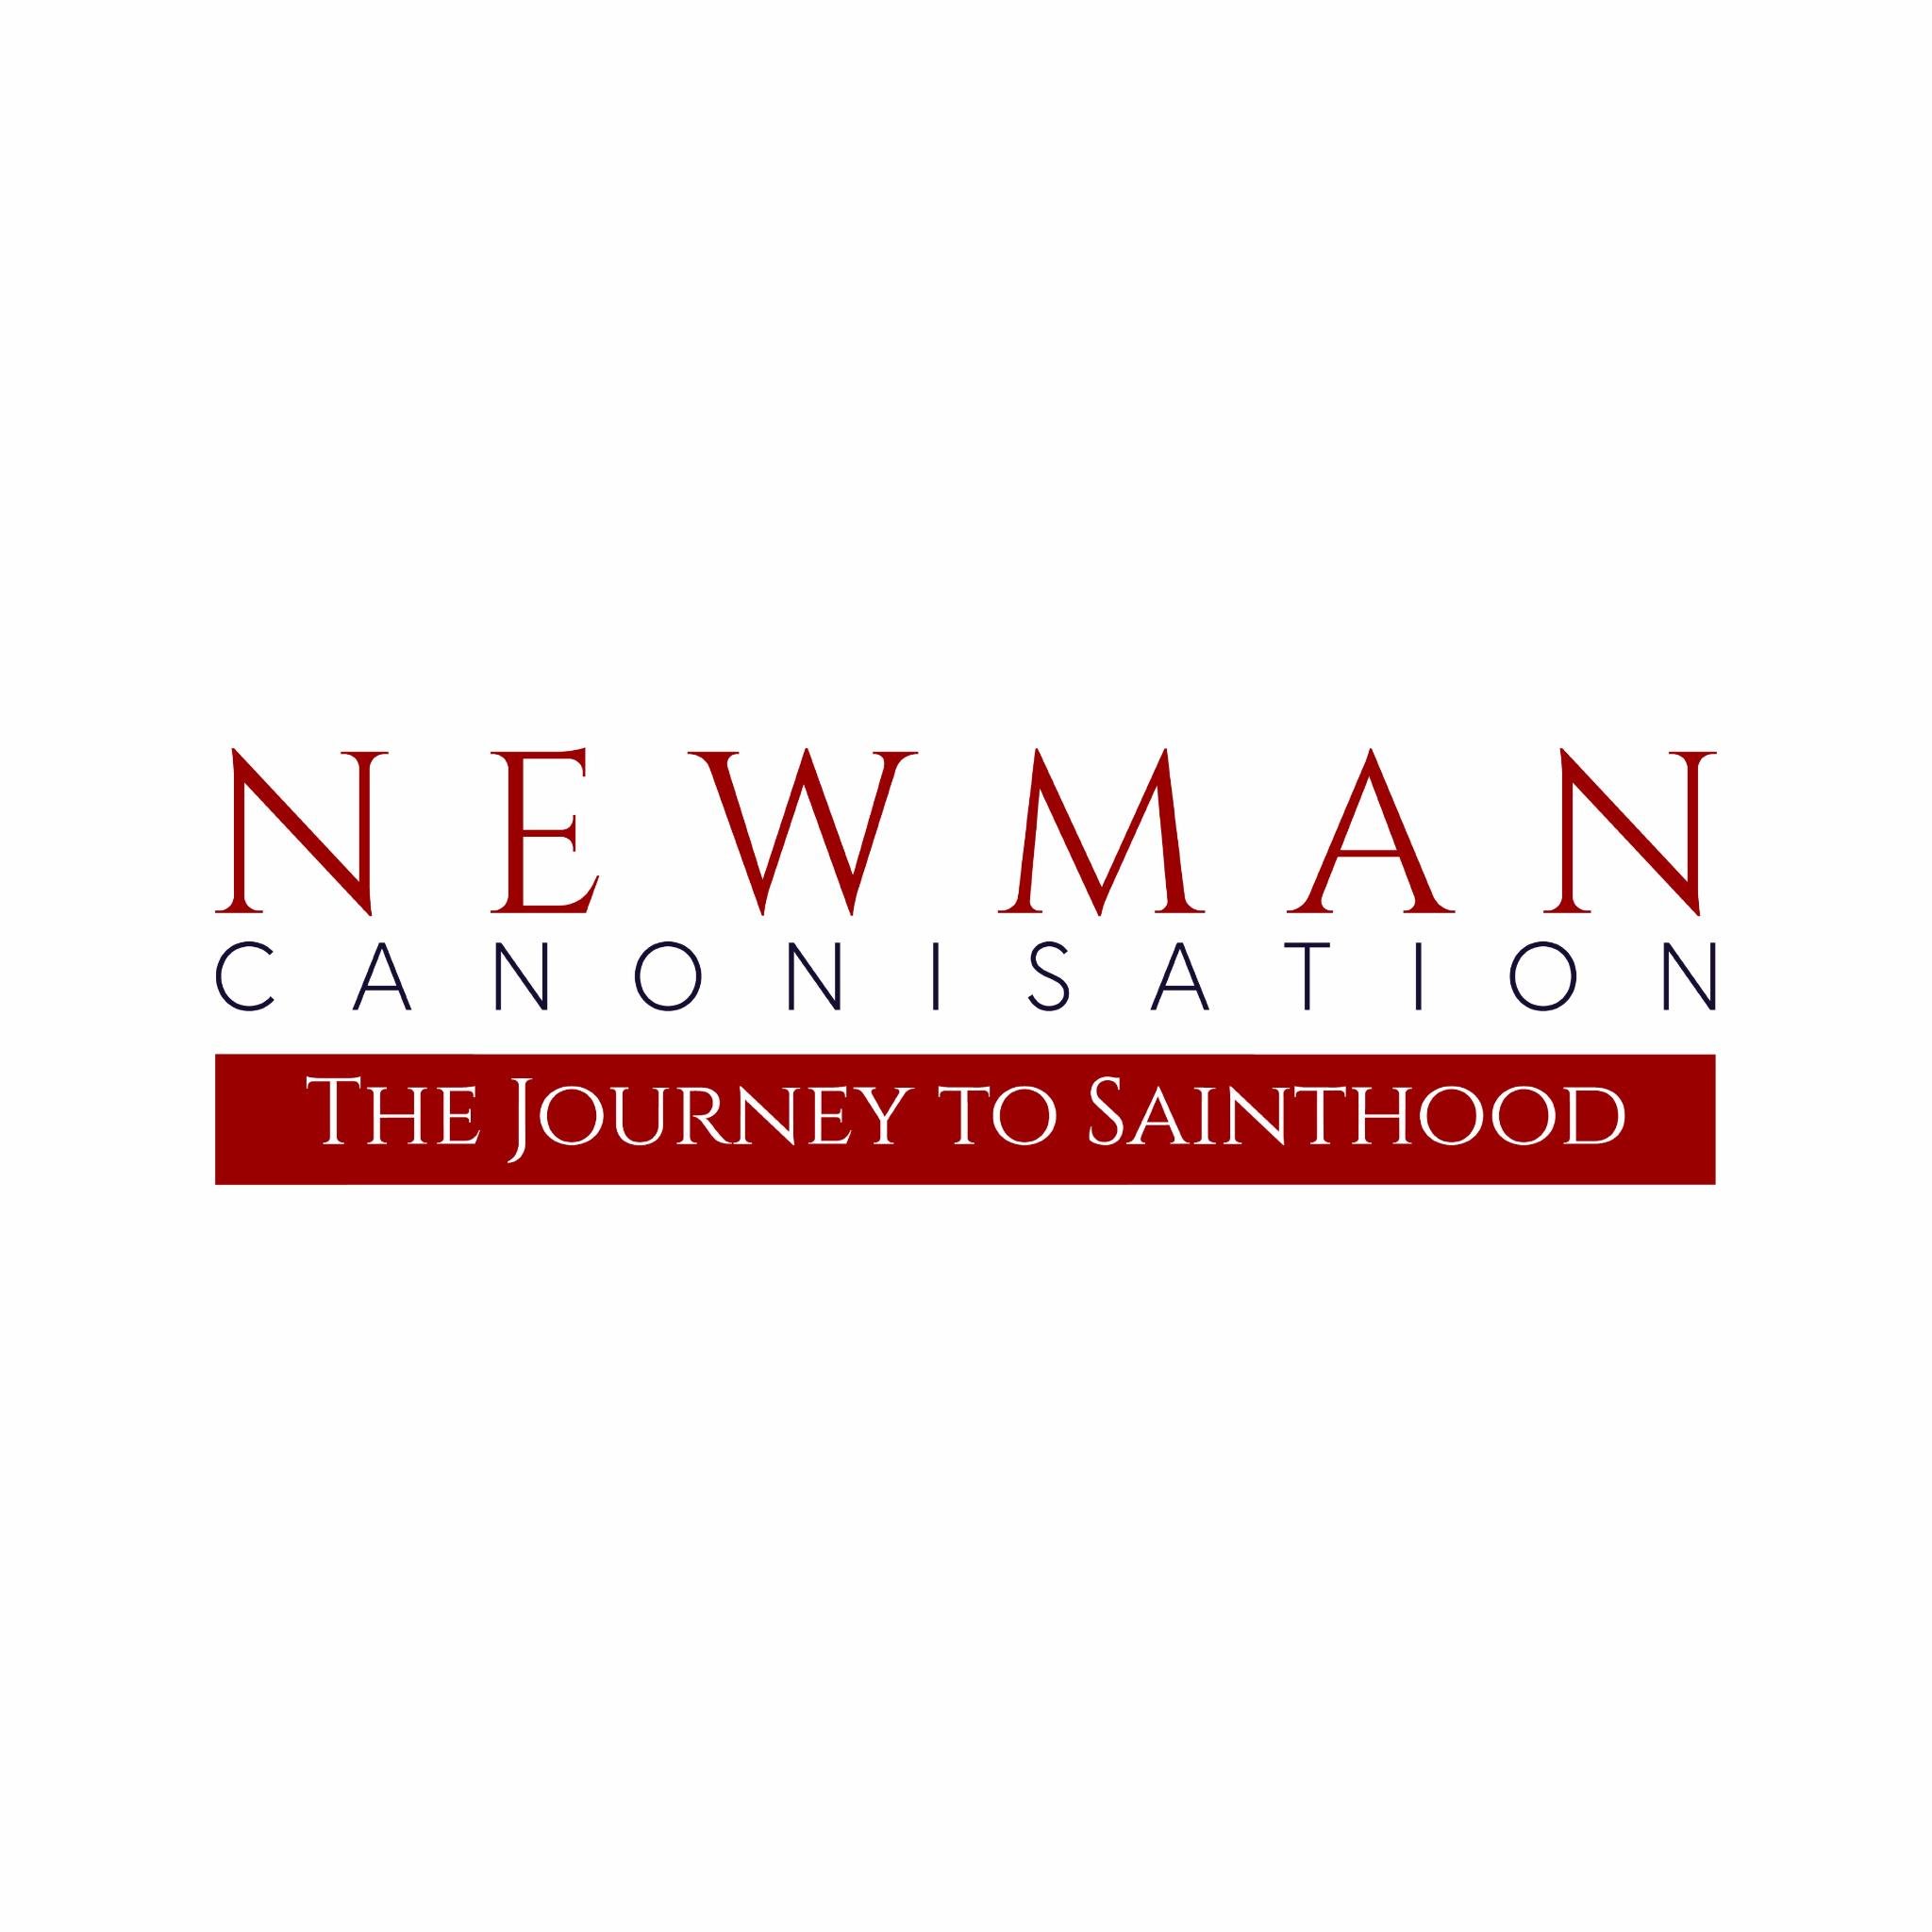 Newman Canonisation